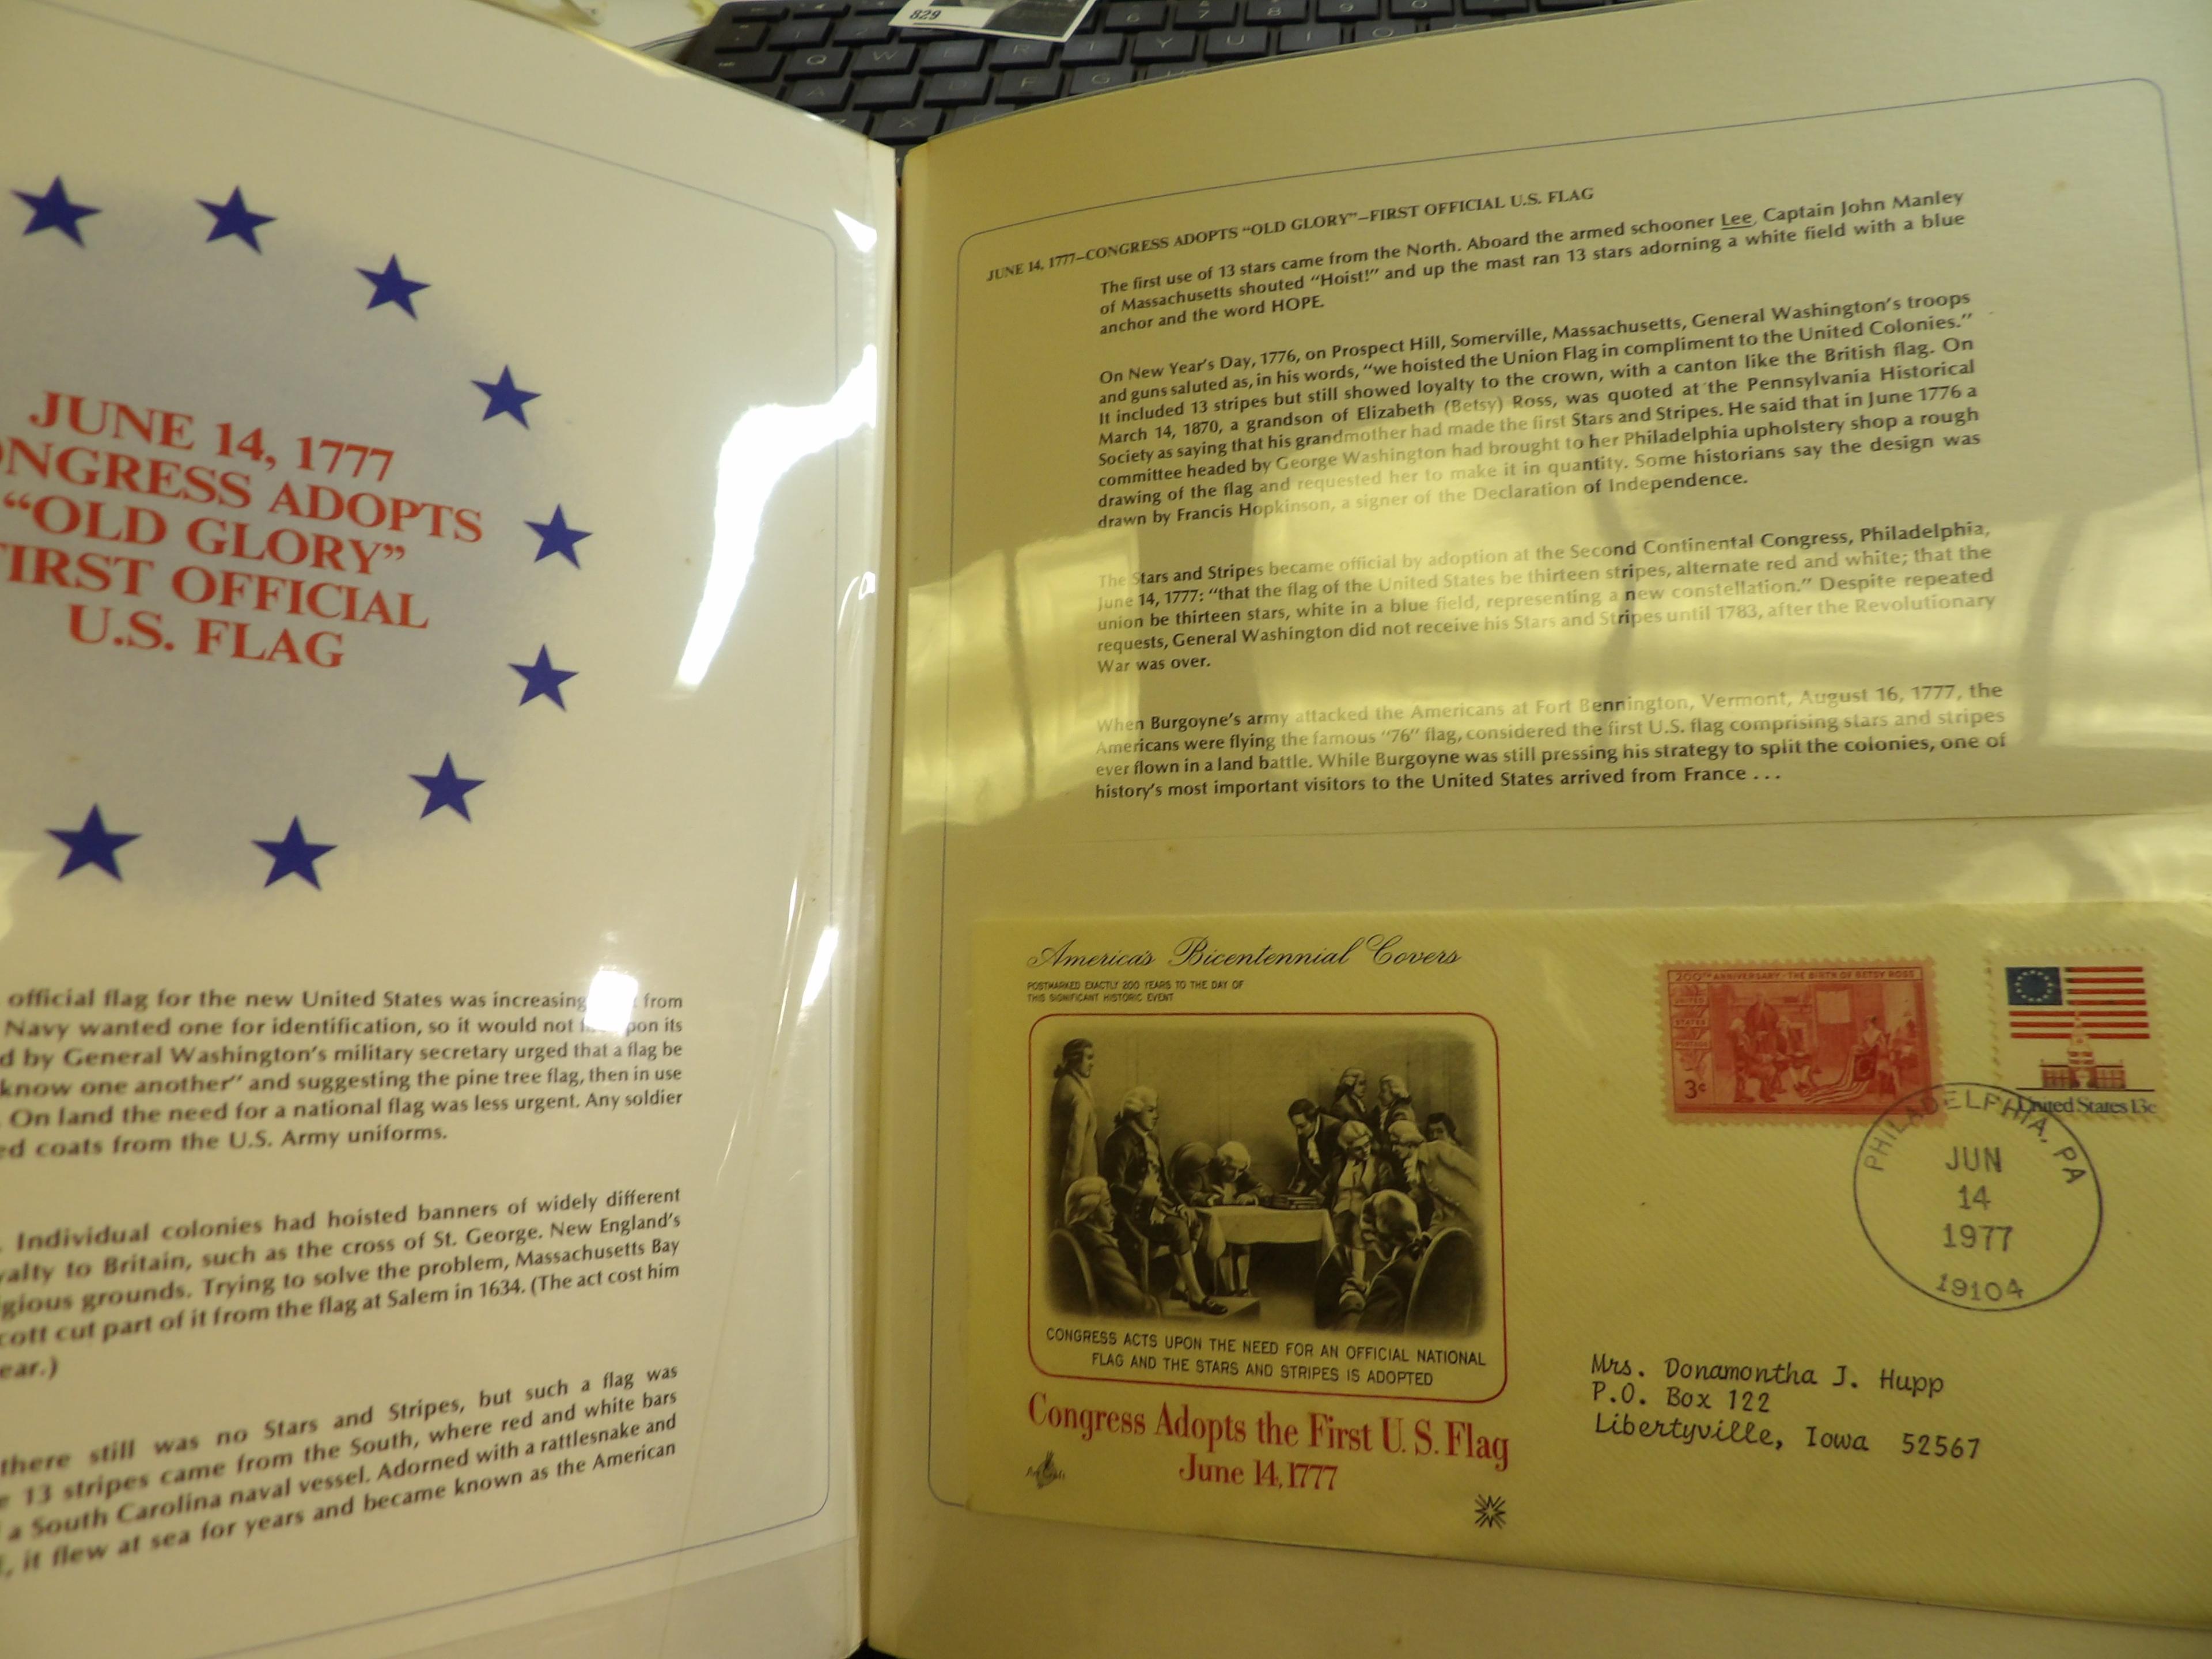 Complete Album America's Bicentennial Covers 1776-1976 â€¦. Once in Your Lifetime.